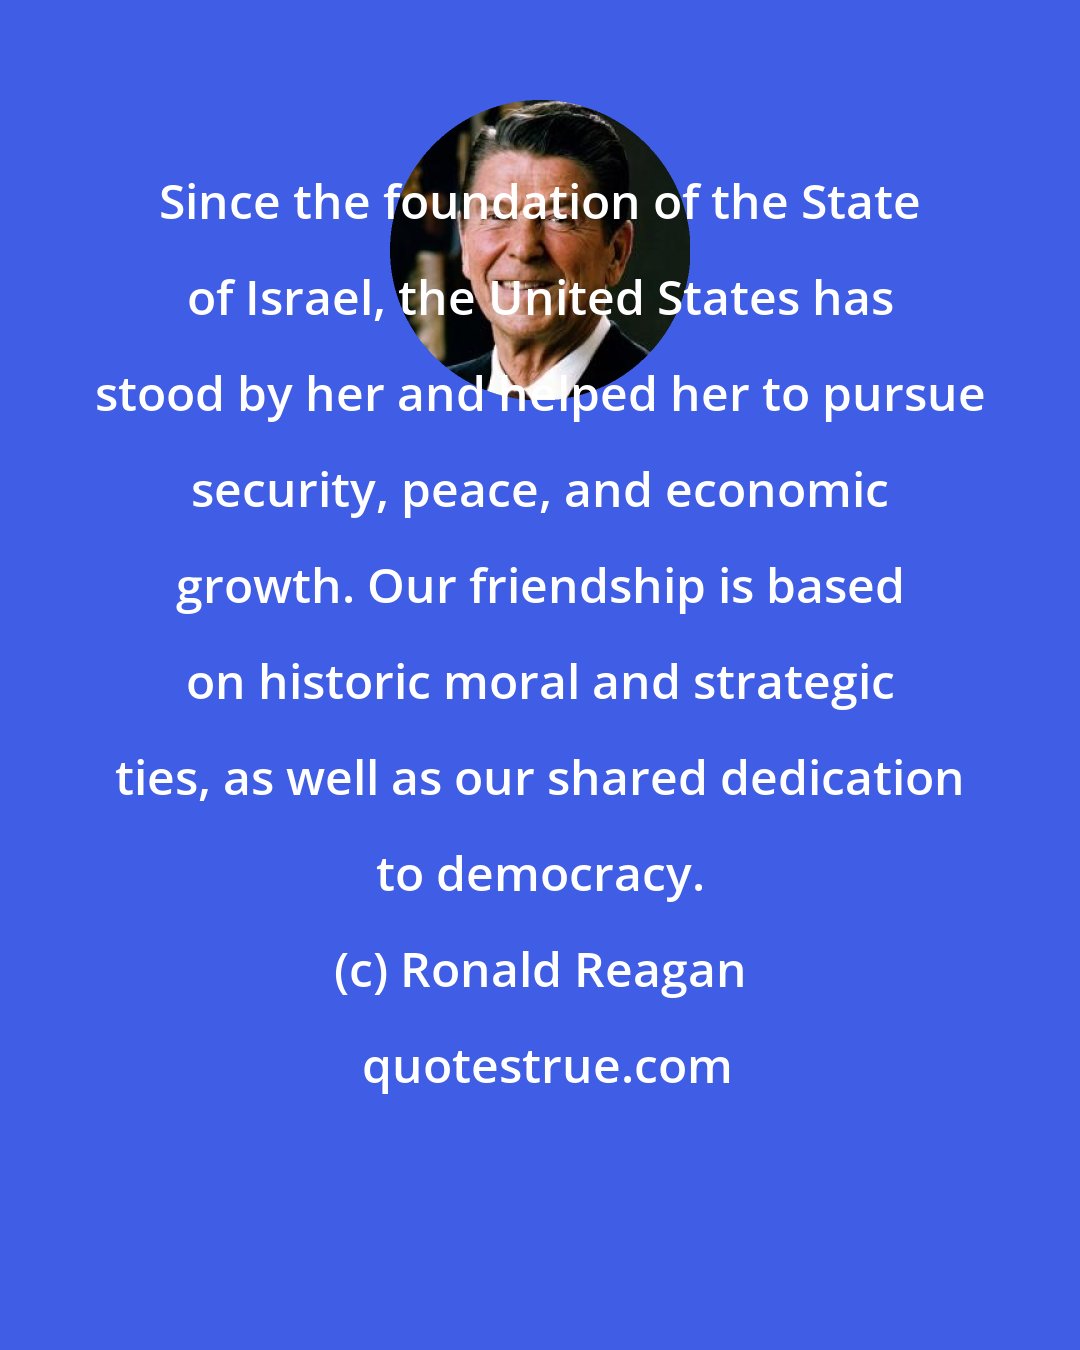 Ronald Reagan: Since the foundation of the State of Israel, the United States has stood by her and helped her to pursue security, peace, and economic growth. Our friendship is based on historic moral and strategic ties, as well as our shared dedication to democracy.